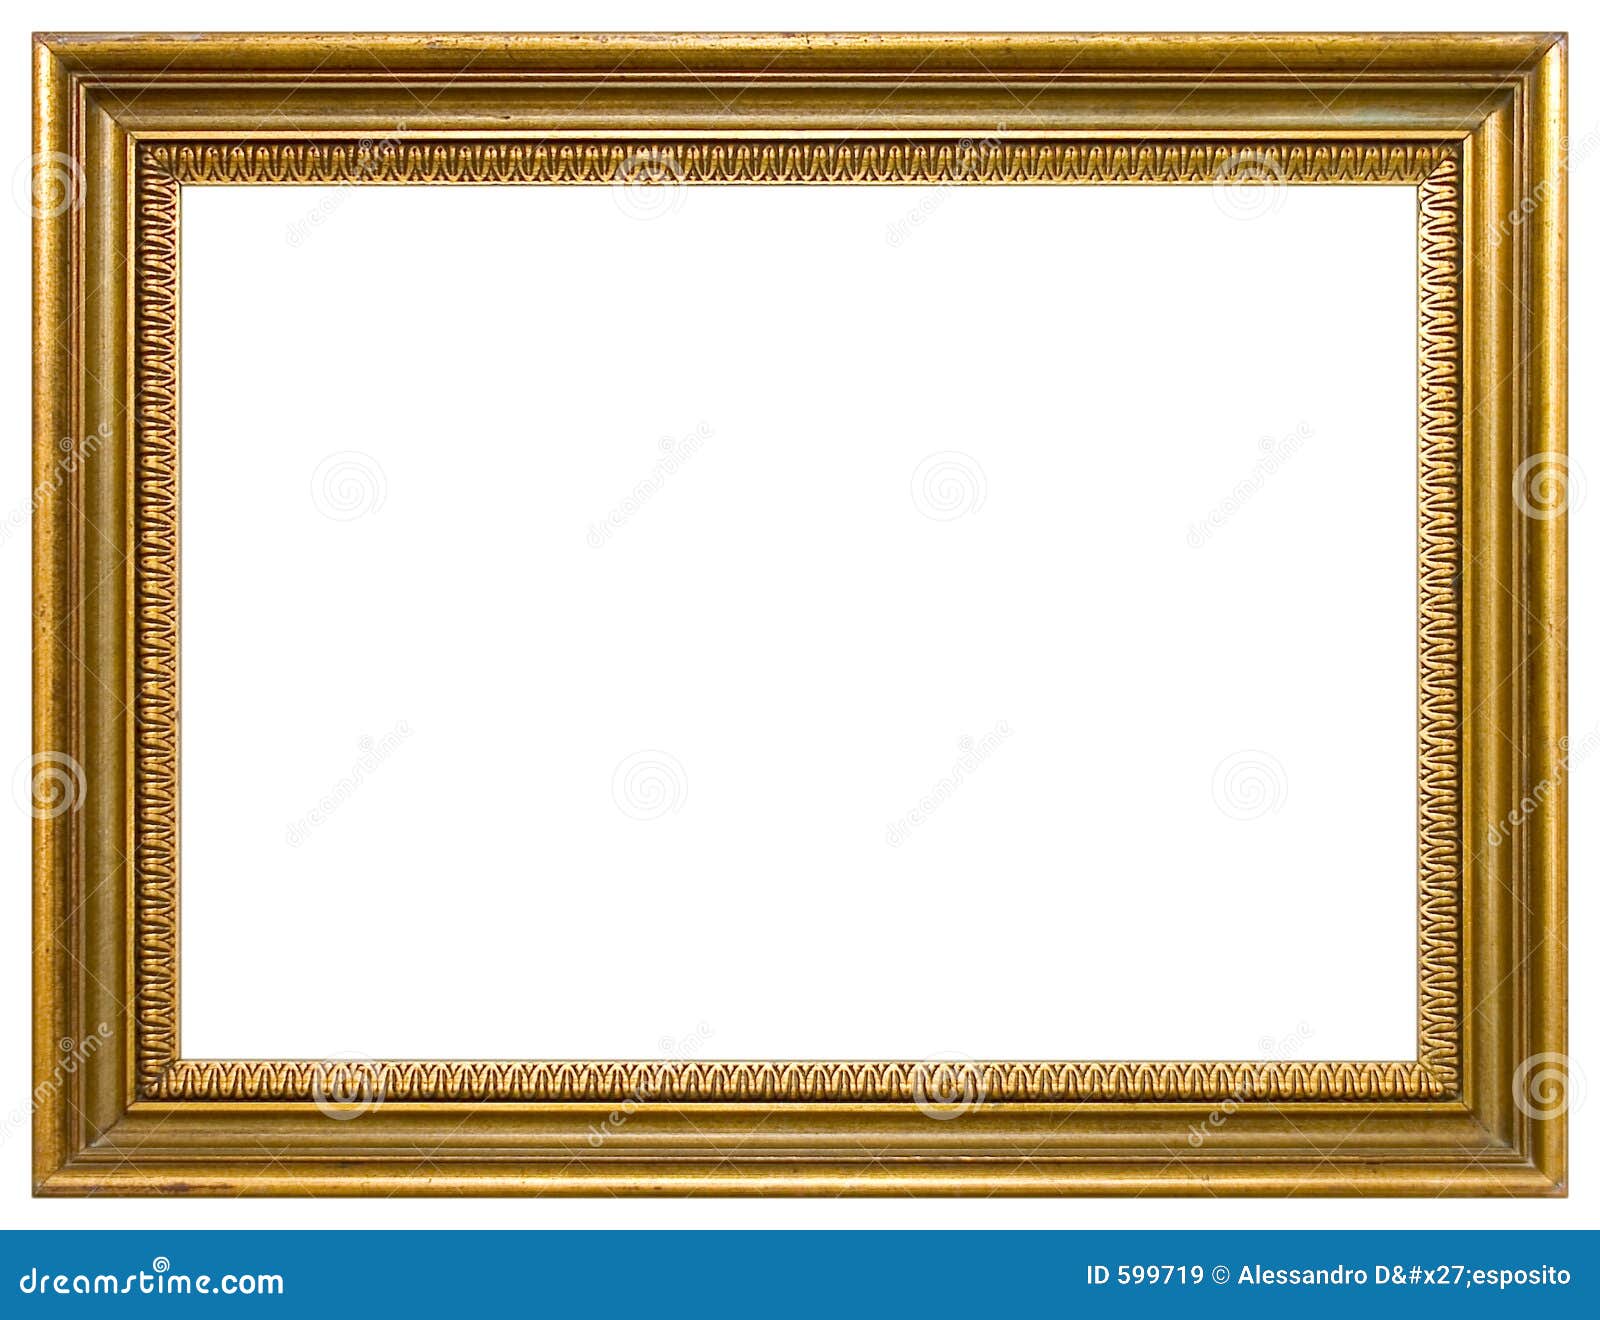 Royalty Free Stock Images: Empty picture frame